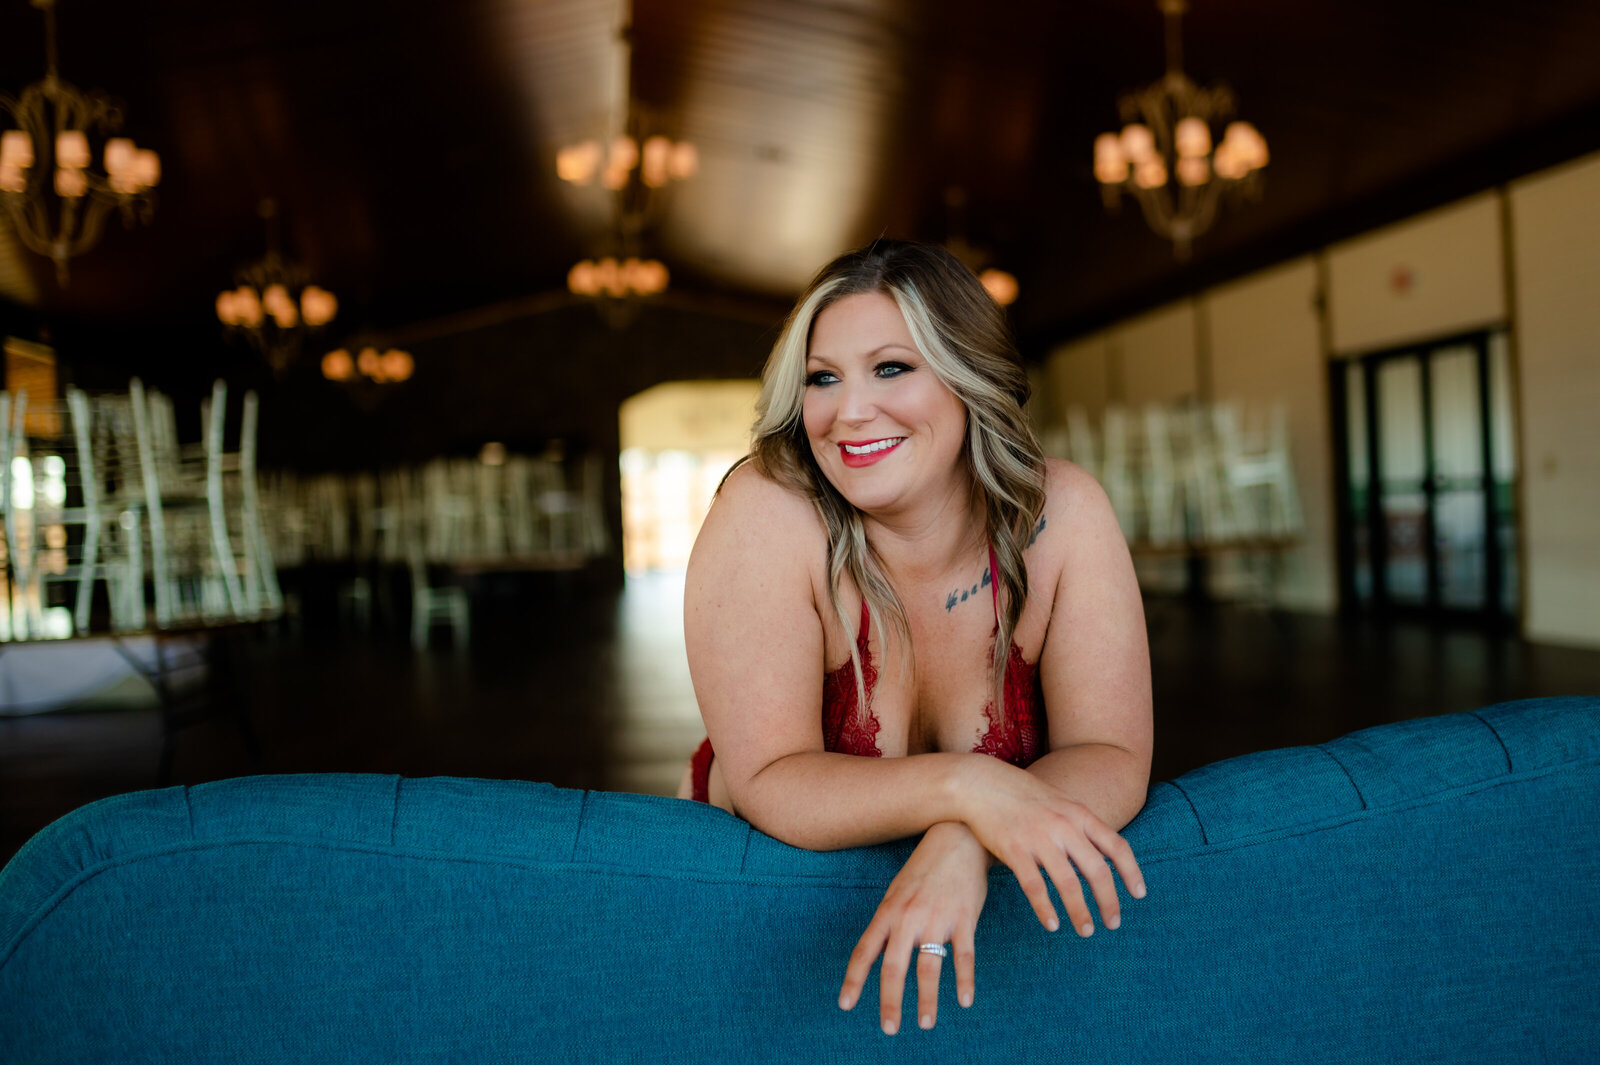 private studio space for Little Rock AR boudoir photography with woman sitting on a blue couch smiling